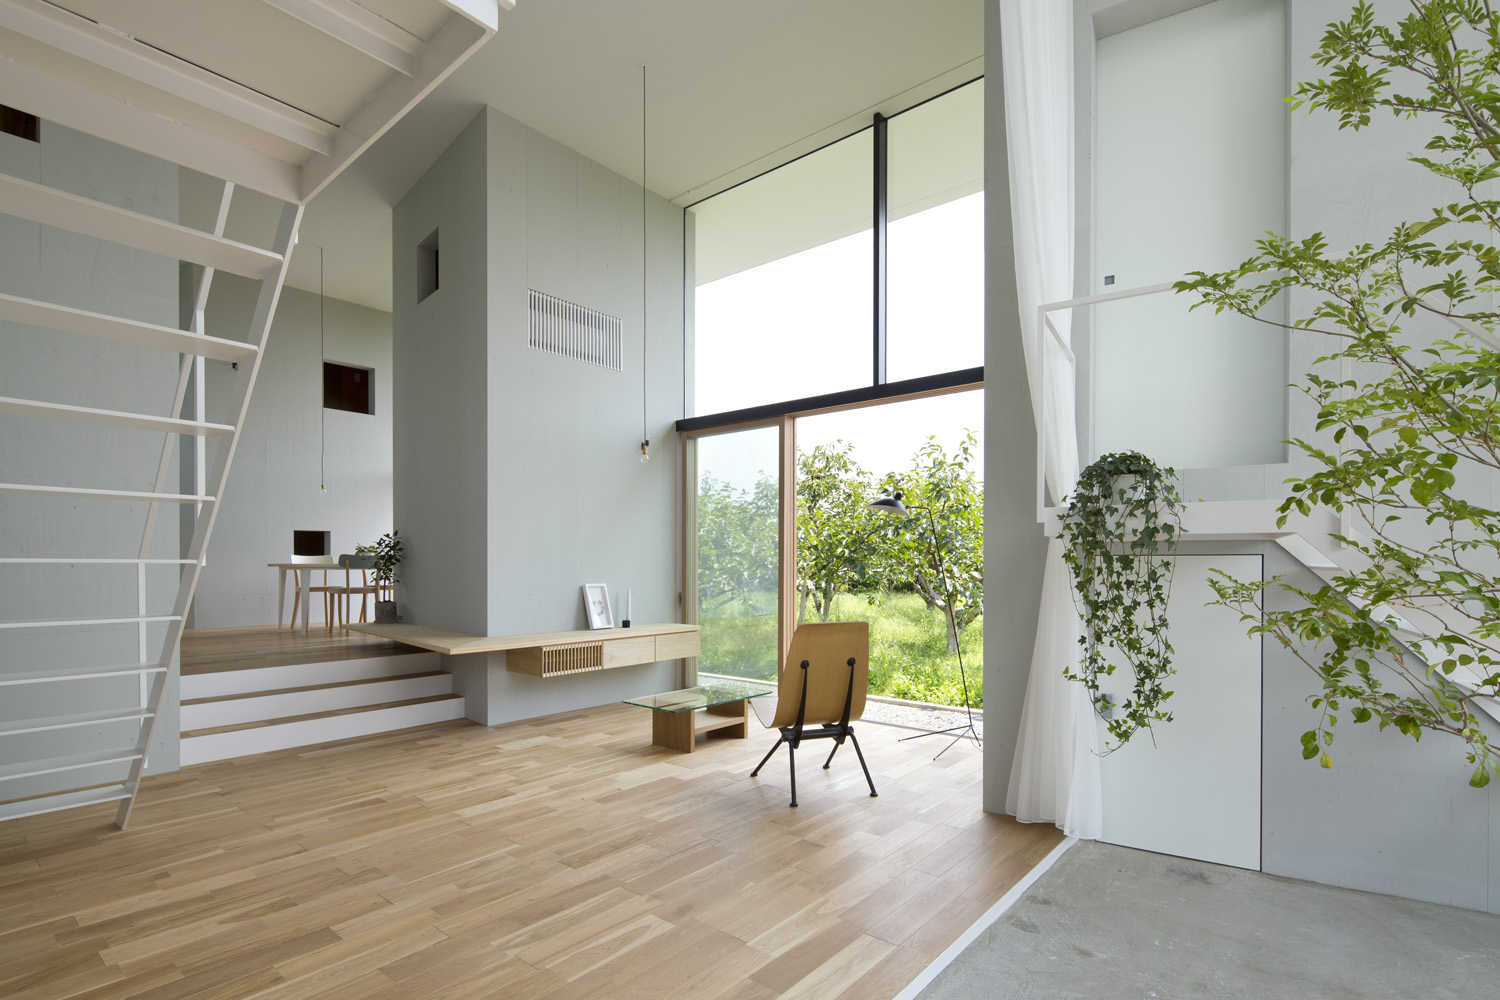 House in Ohno in Gifu, Japan by Airhouse